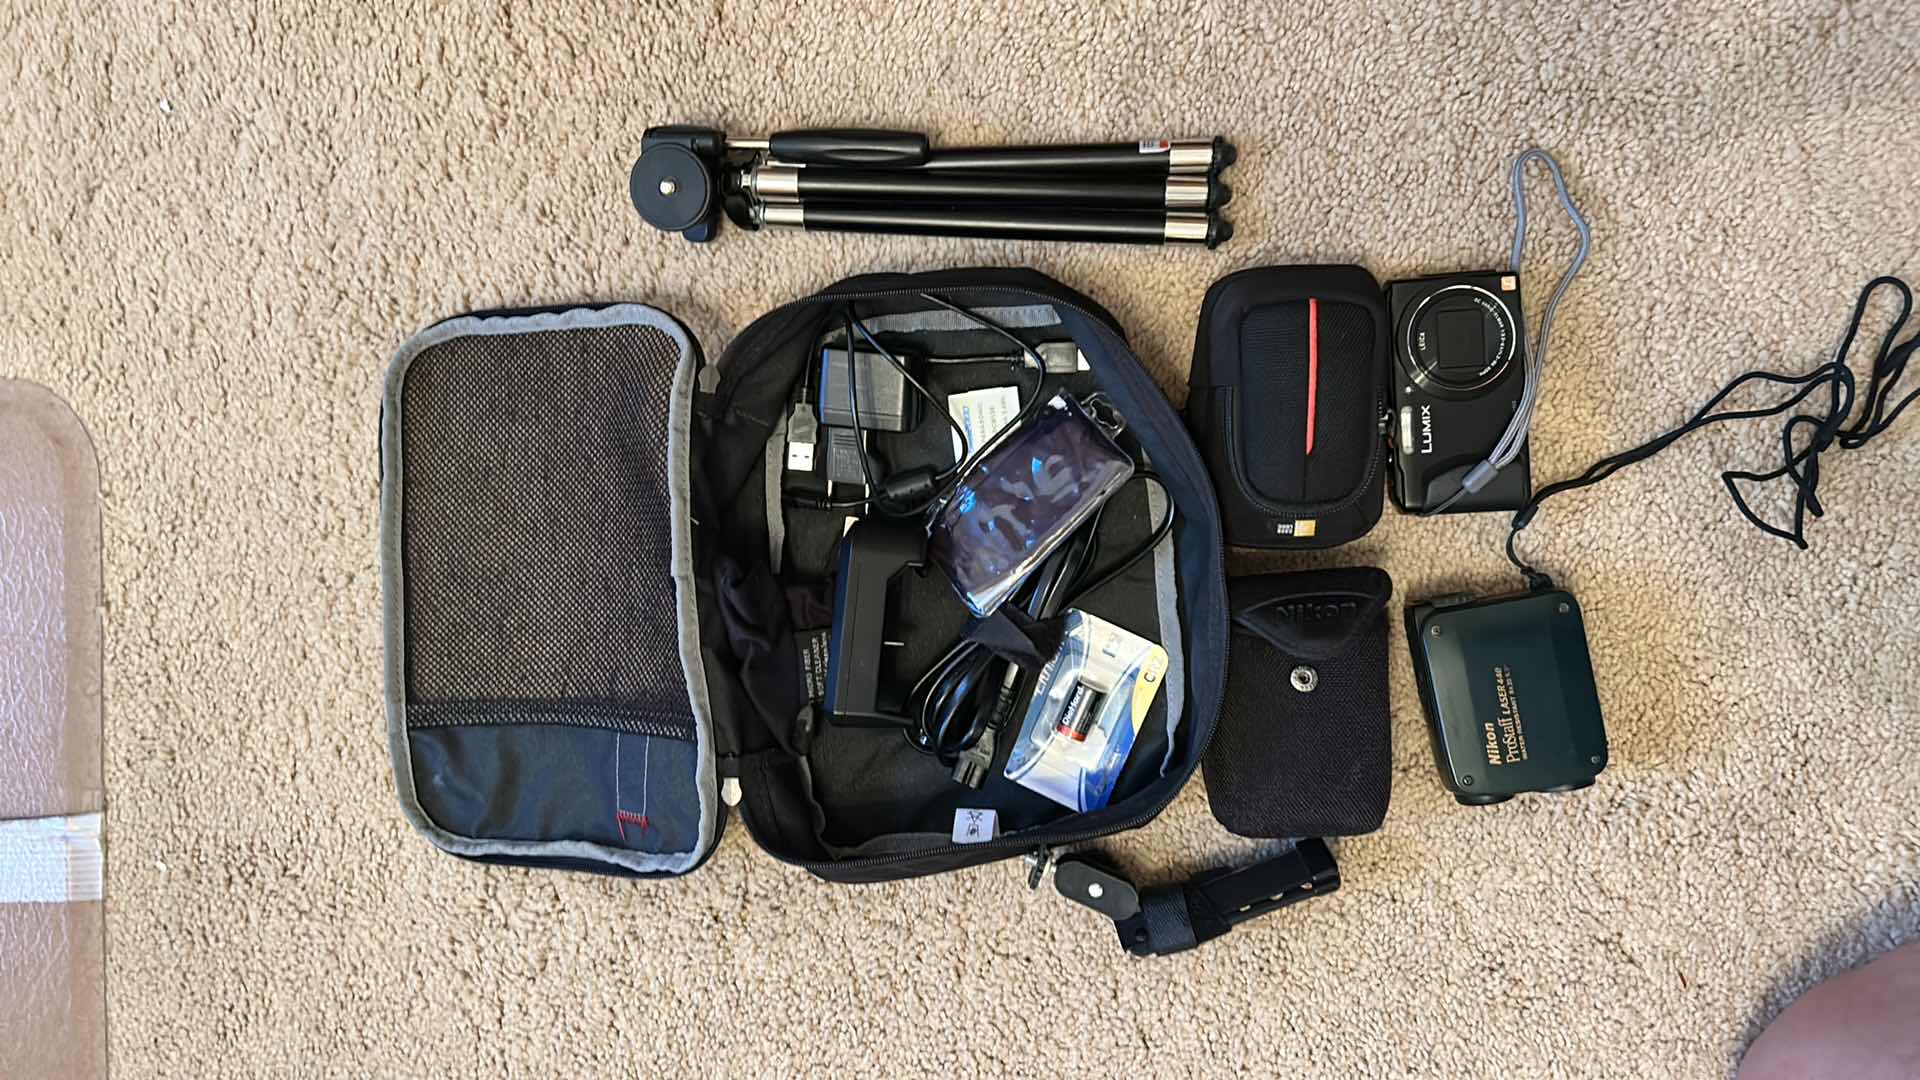 Photo 7 of Lumix camera, Nikon, Prostaff, laser carrying case, tripod, and accessories